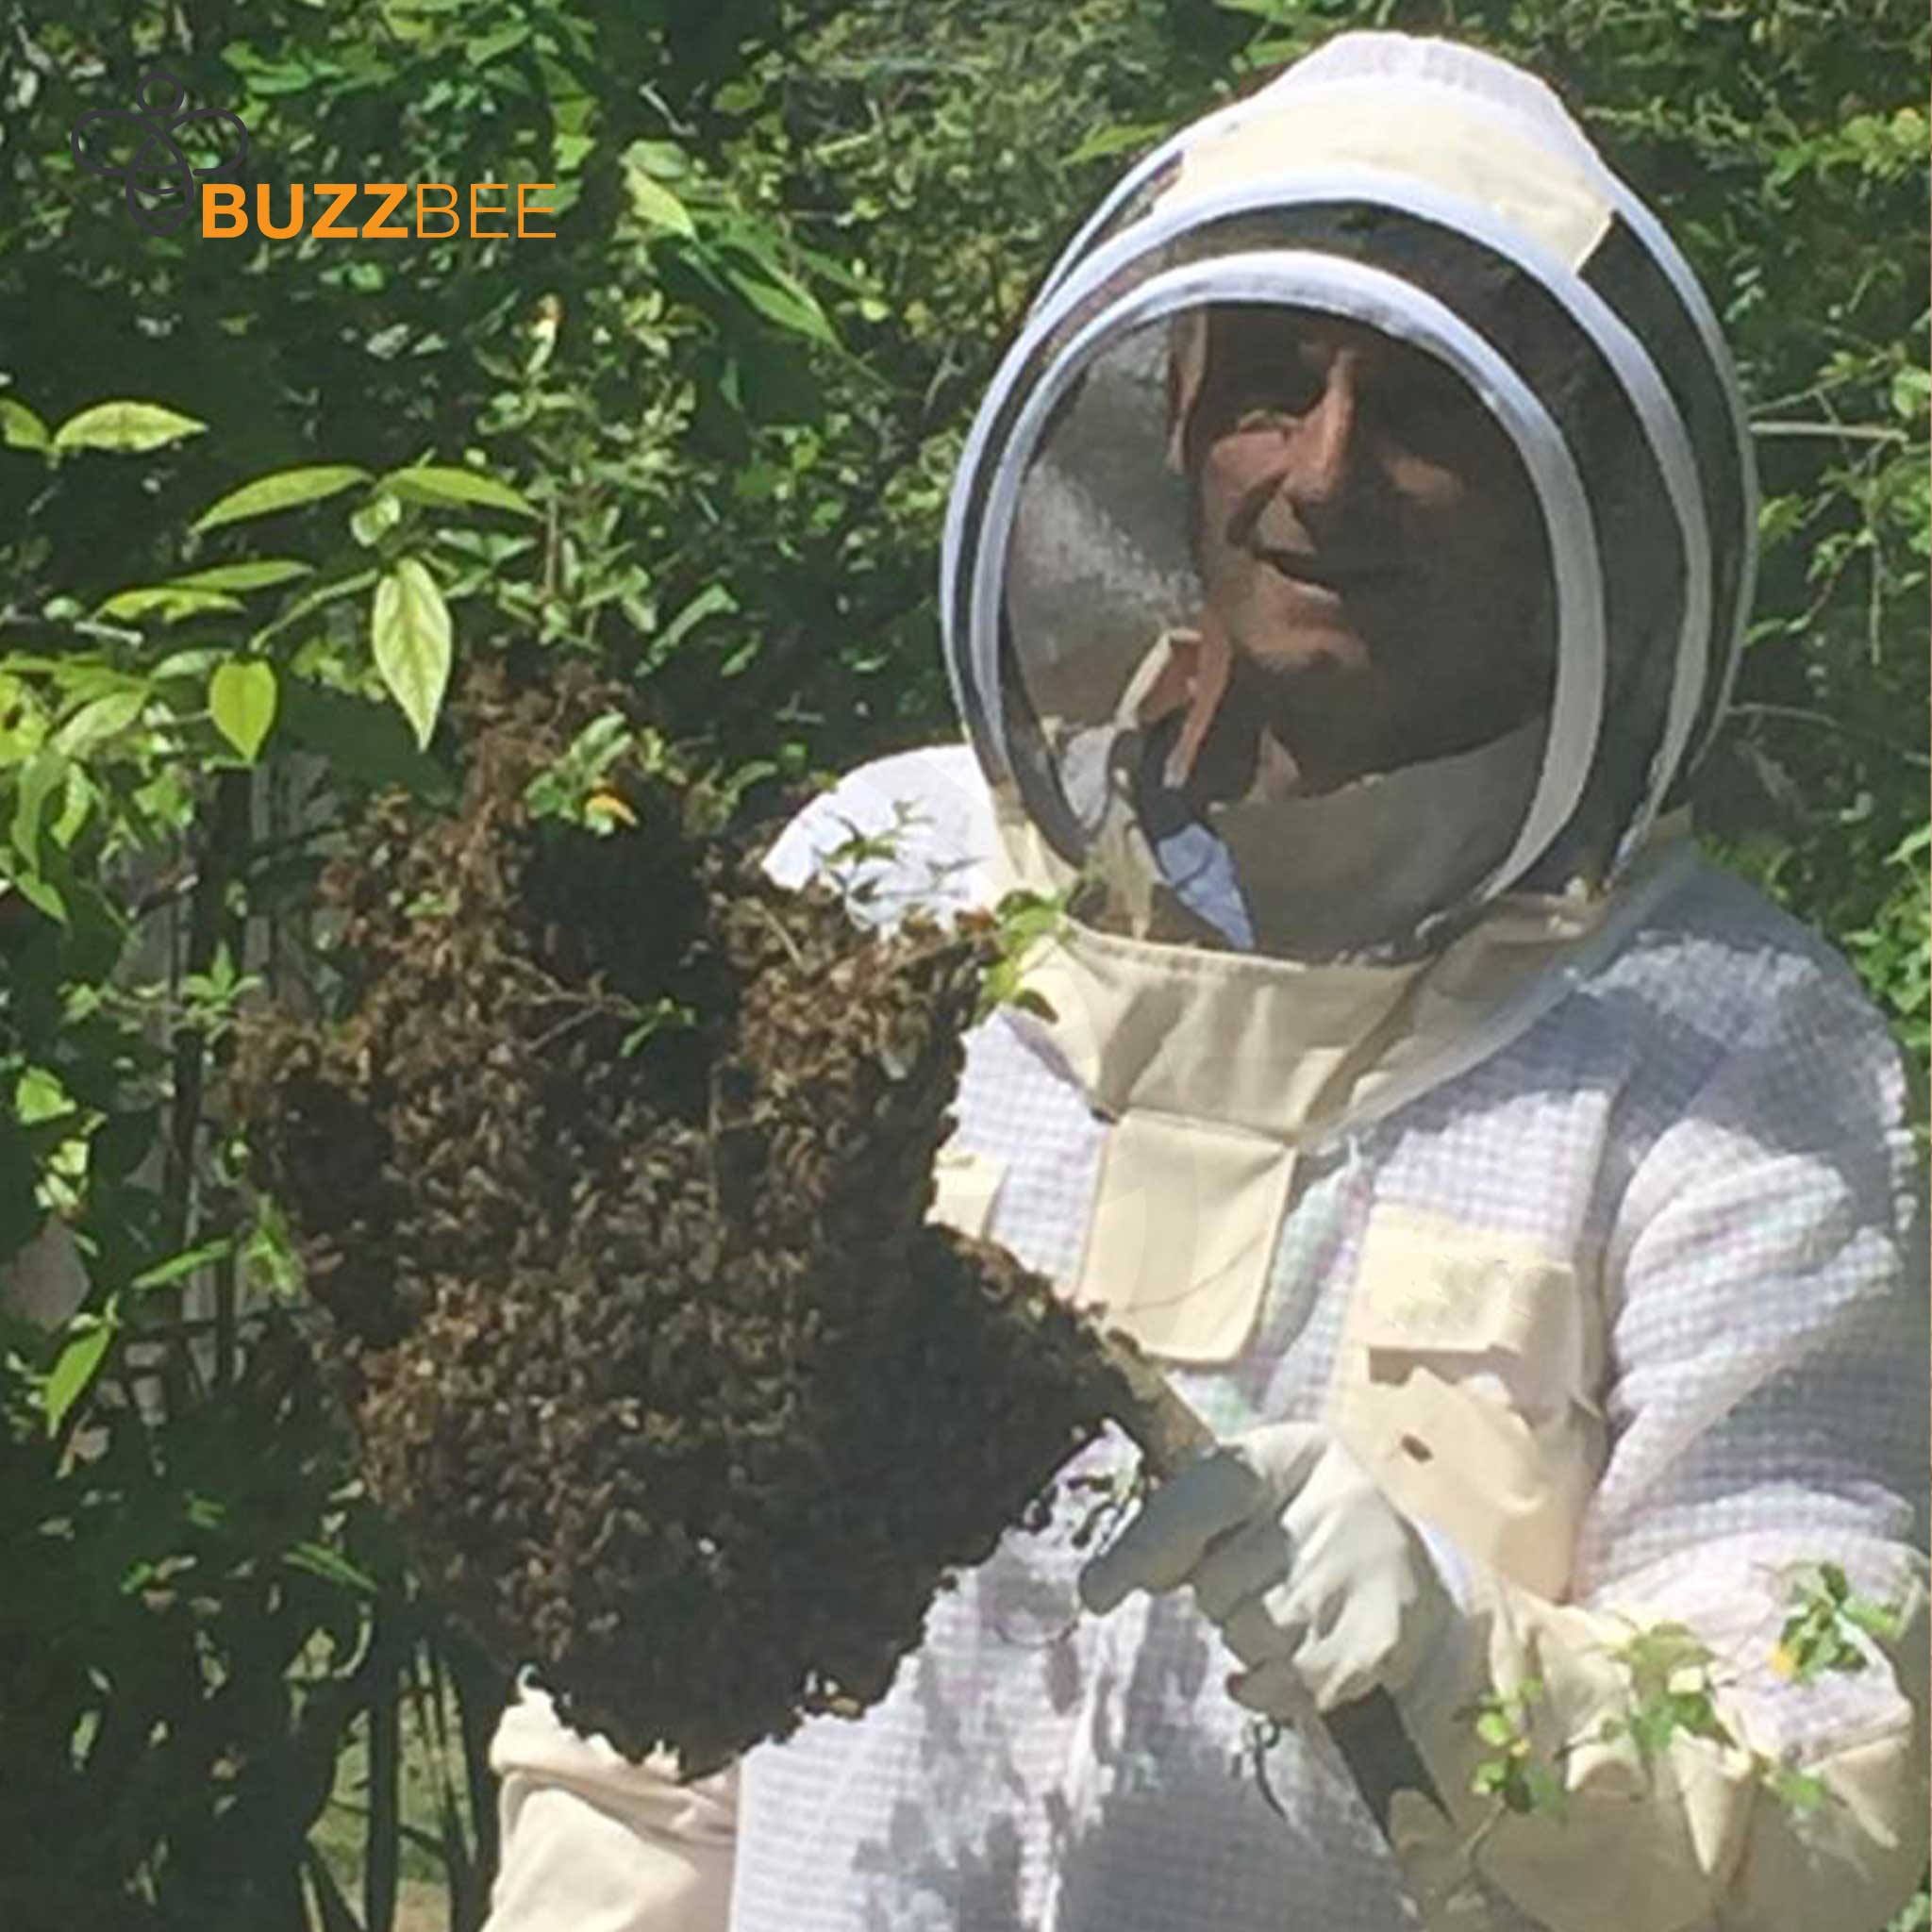 Bee Removal Service - Bee Service collection by Buzzbee Beekeeping Supplies